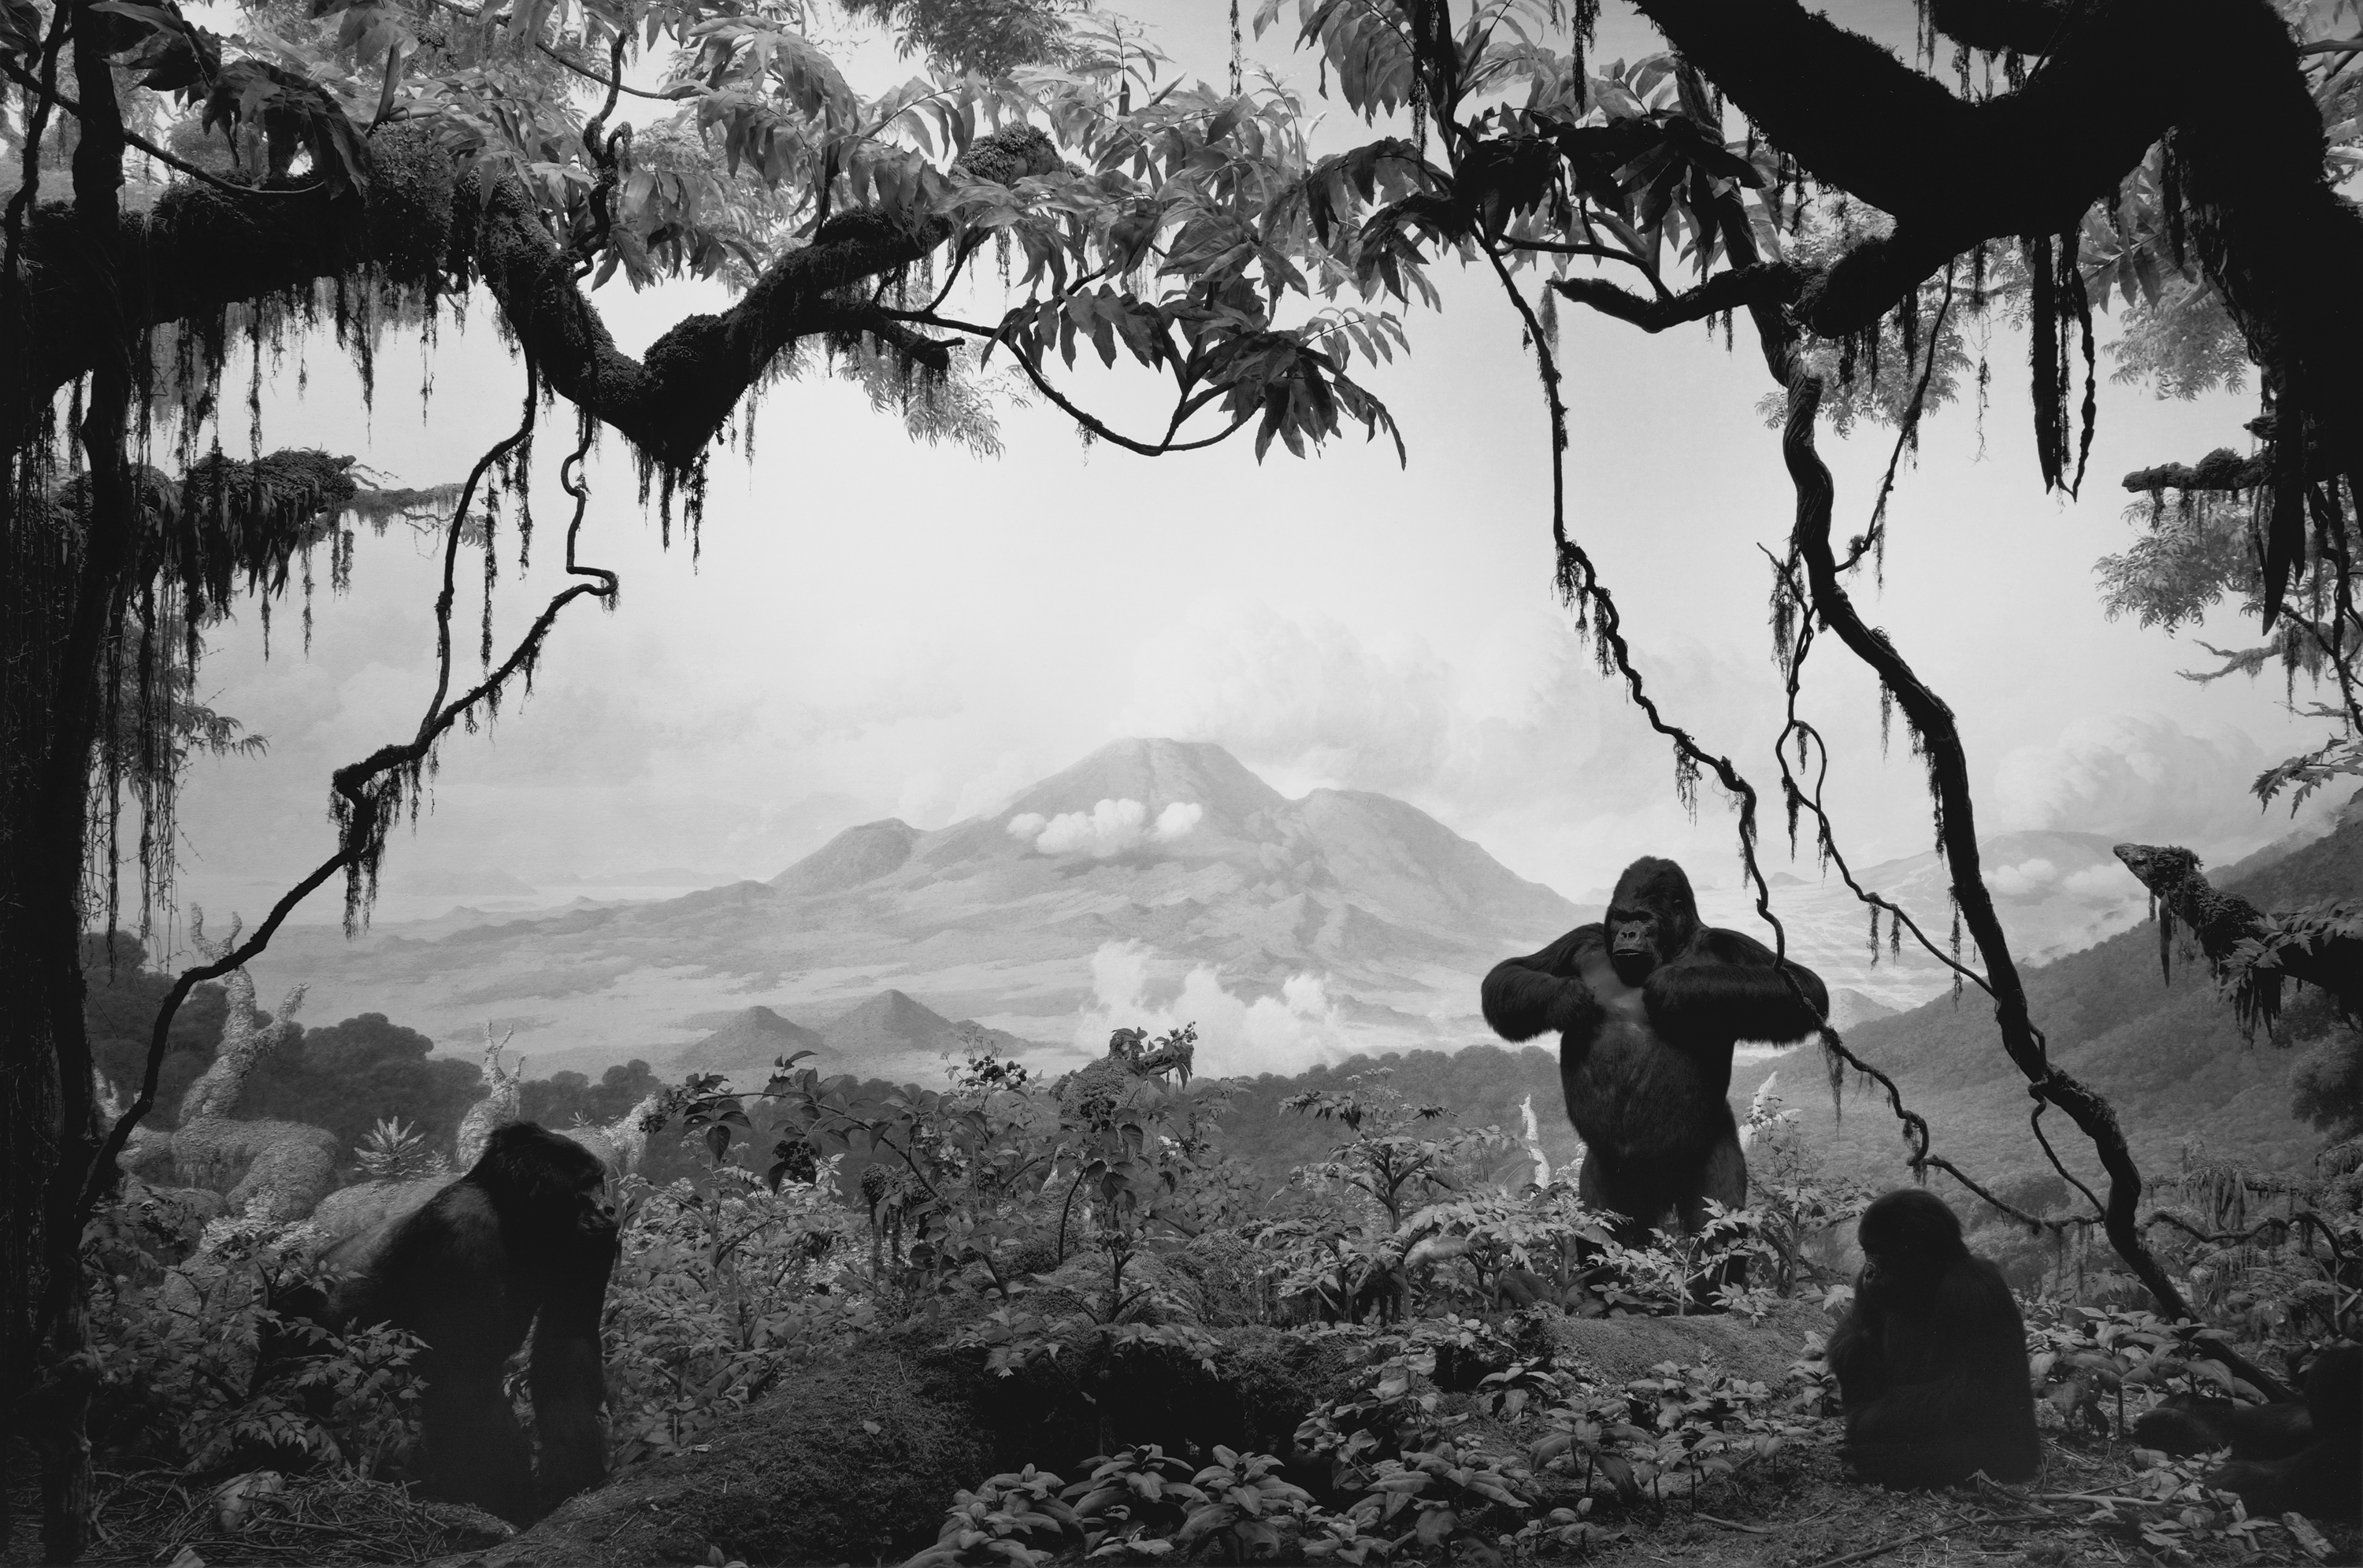 Black and white photograph of a diorama depicting three gorillas within a verdant jungle with a mountain range on the horizon